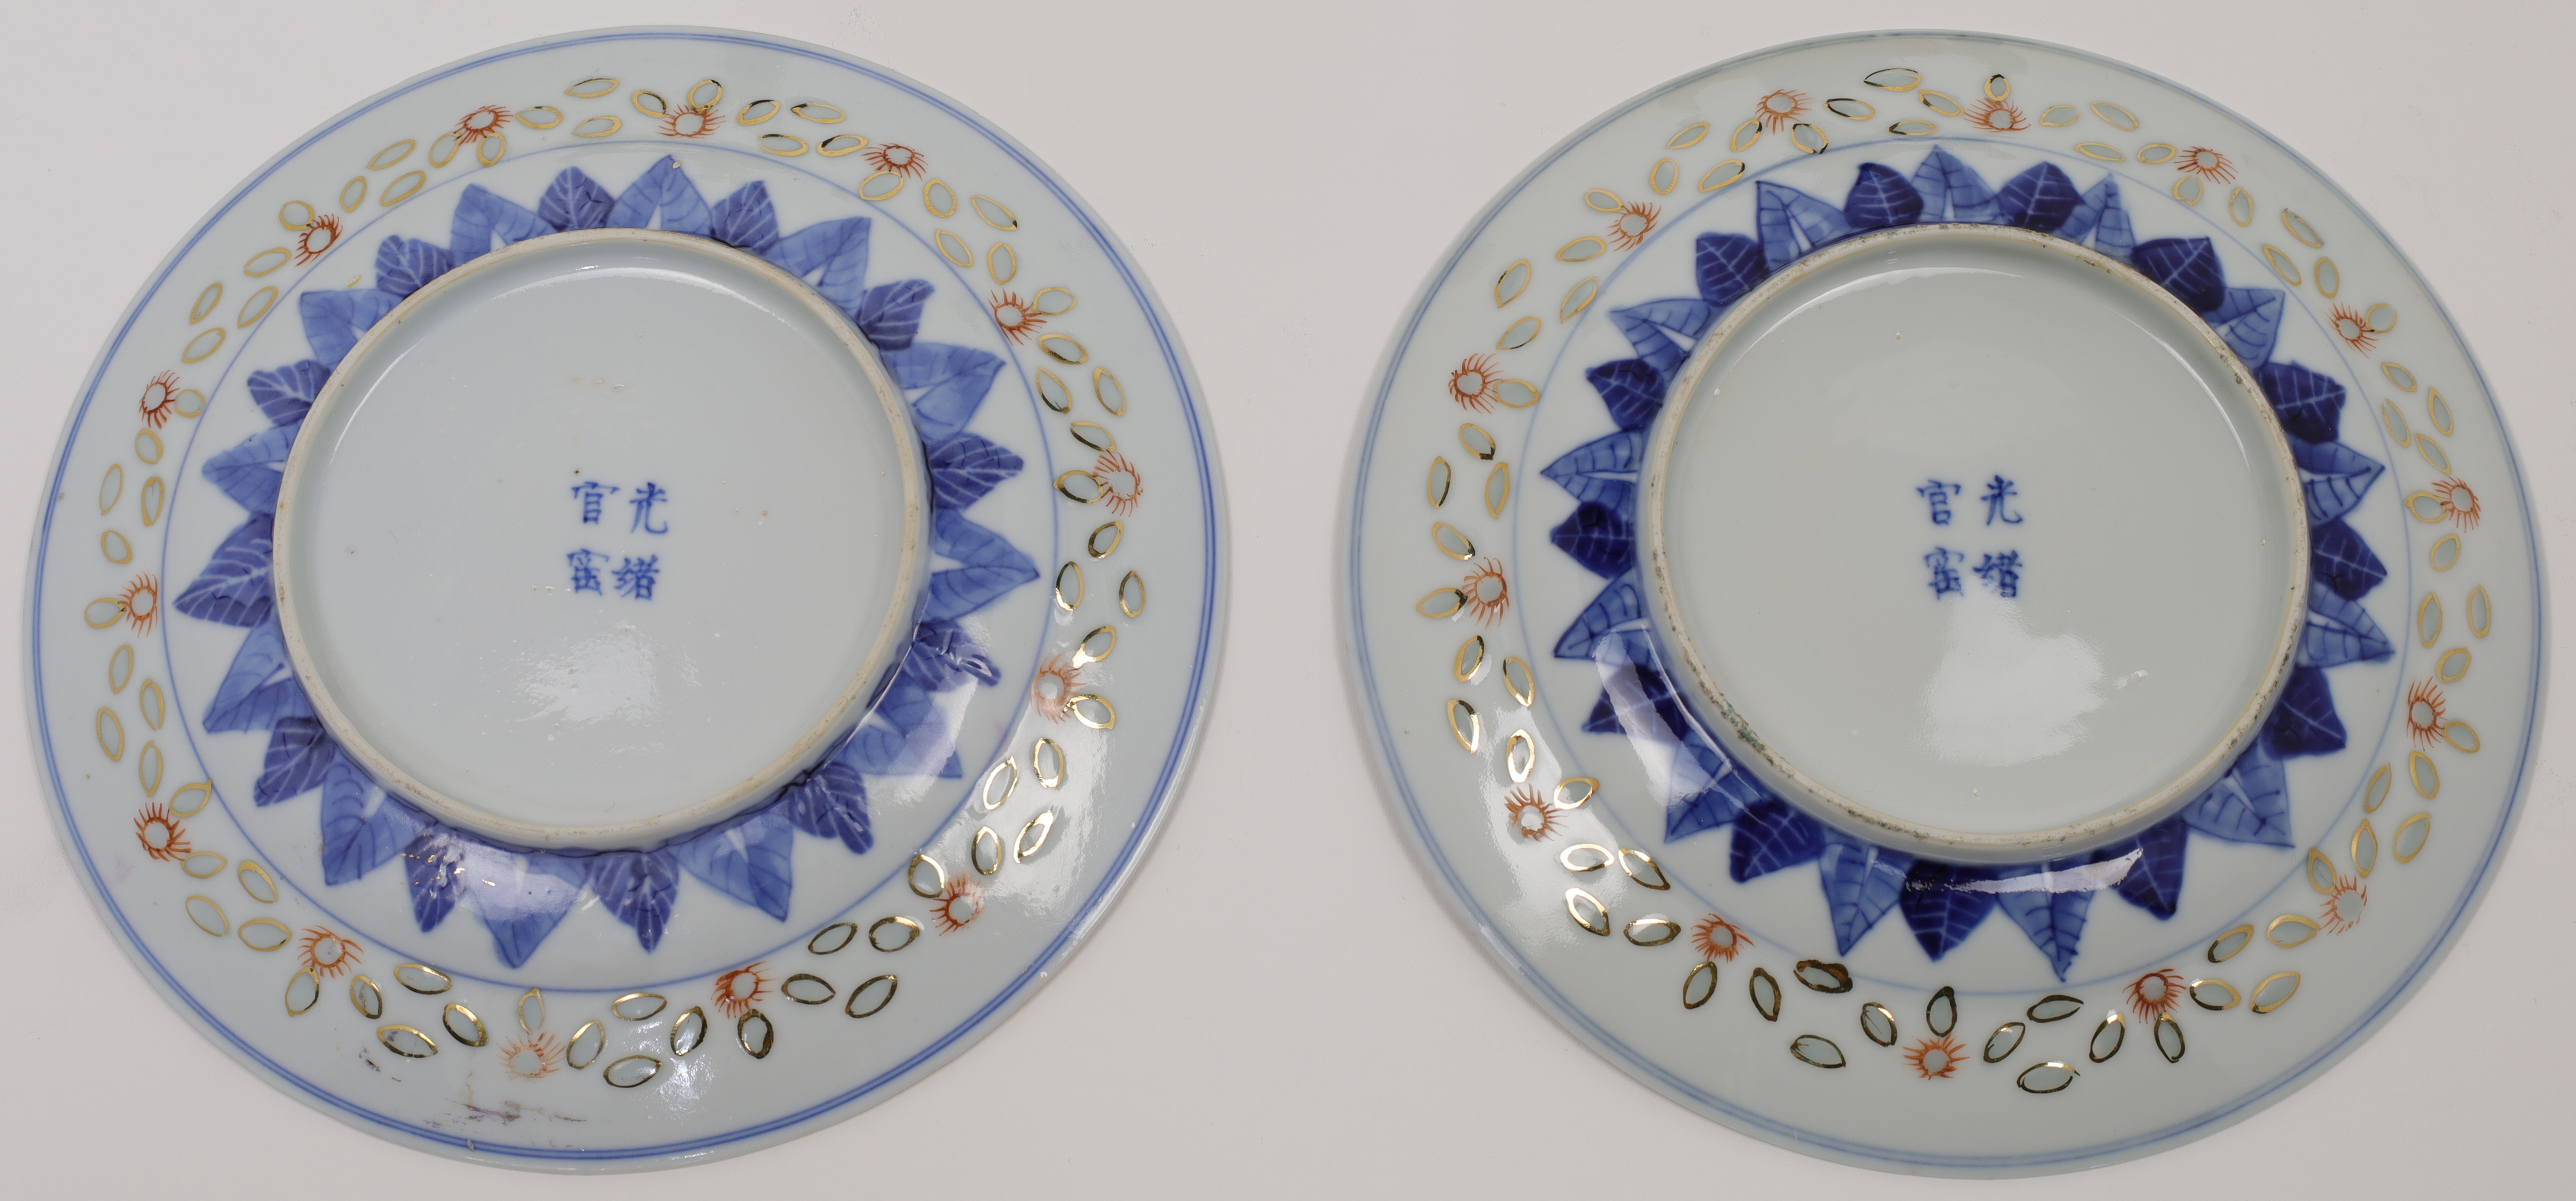 A pair of Chinese doucai 'dragon' dishes, Republic period, apocryphal Guangxu Guanyao four charac... - Image 2 of 2